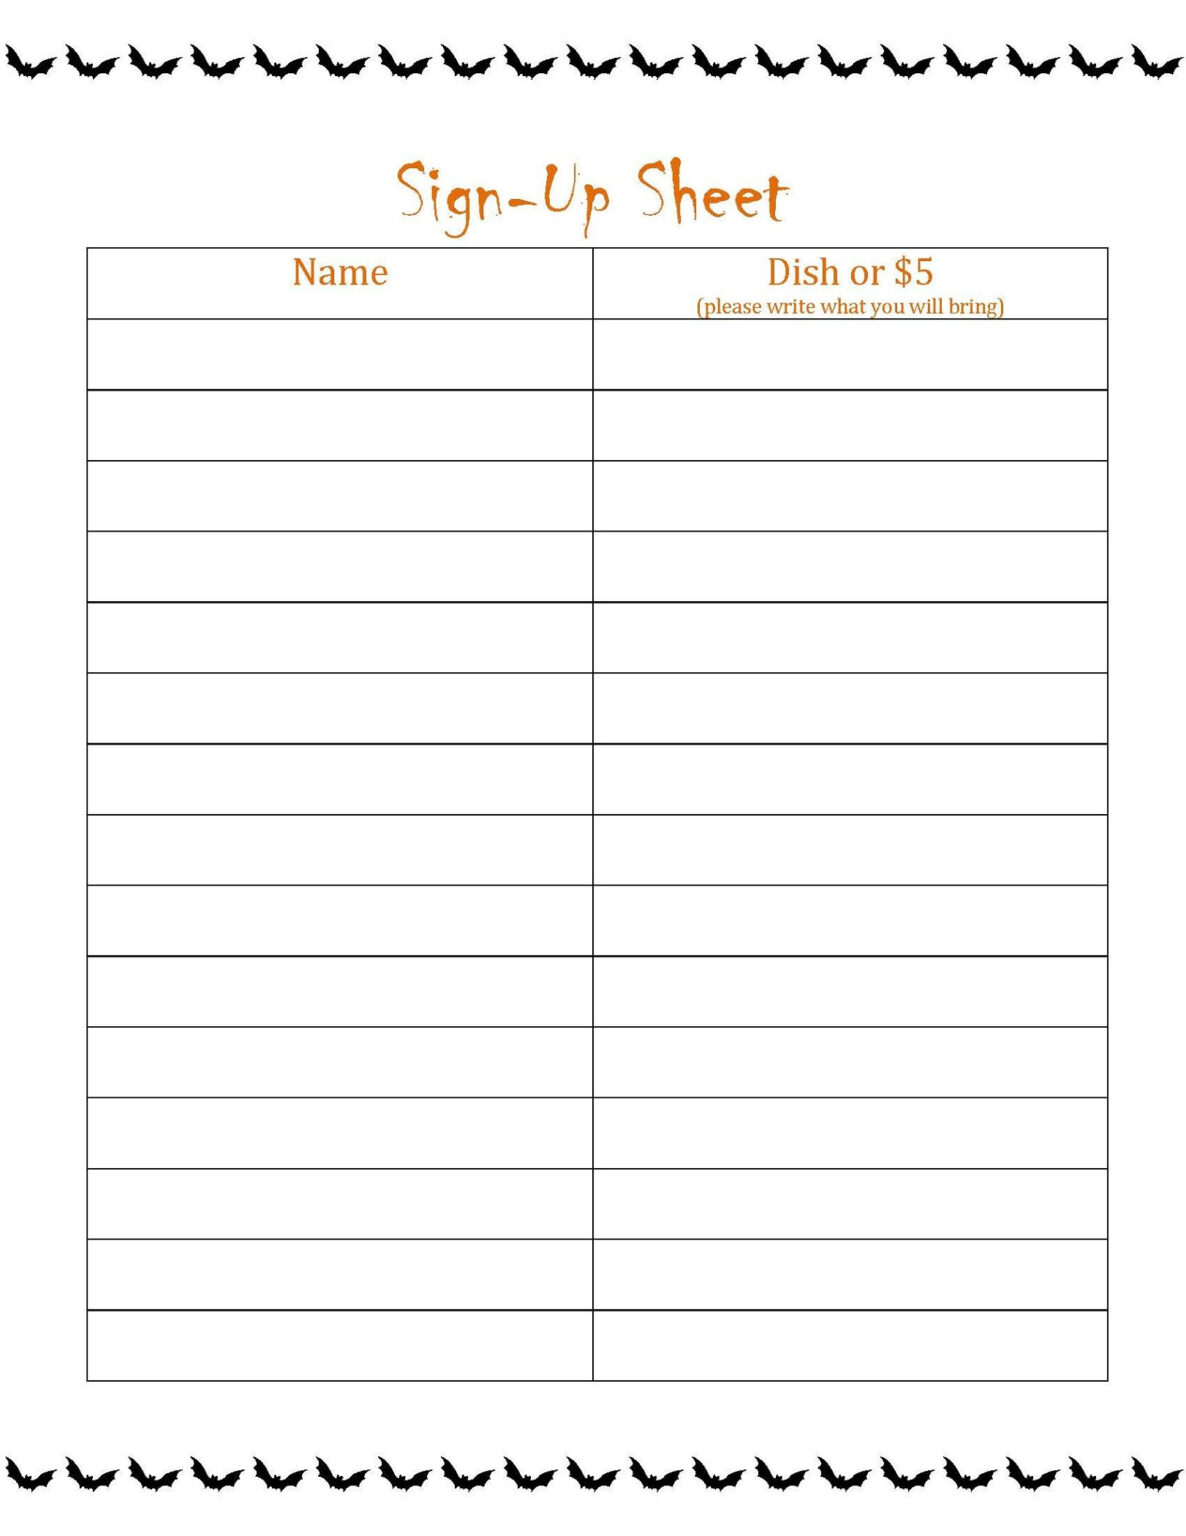 025 Potluck Sign Up Sheet Template Excel Ideas Surprising throughout